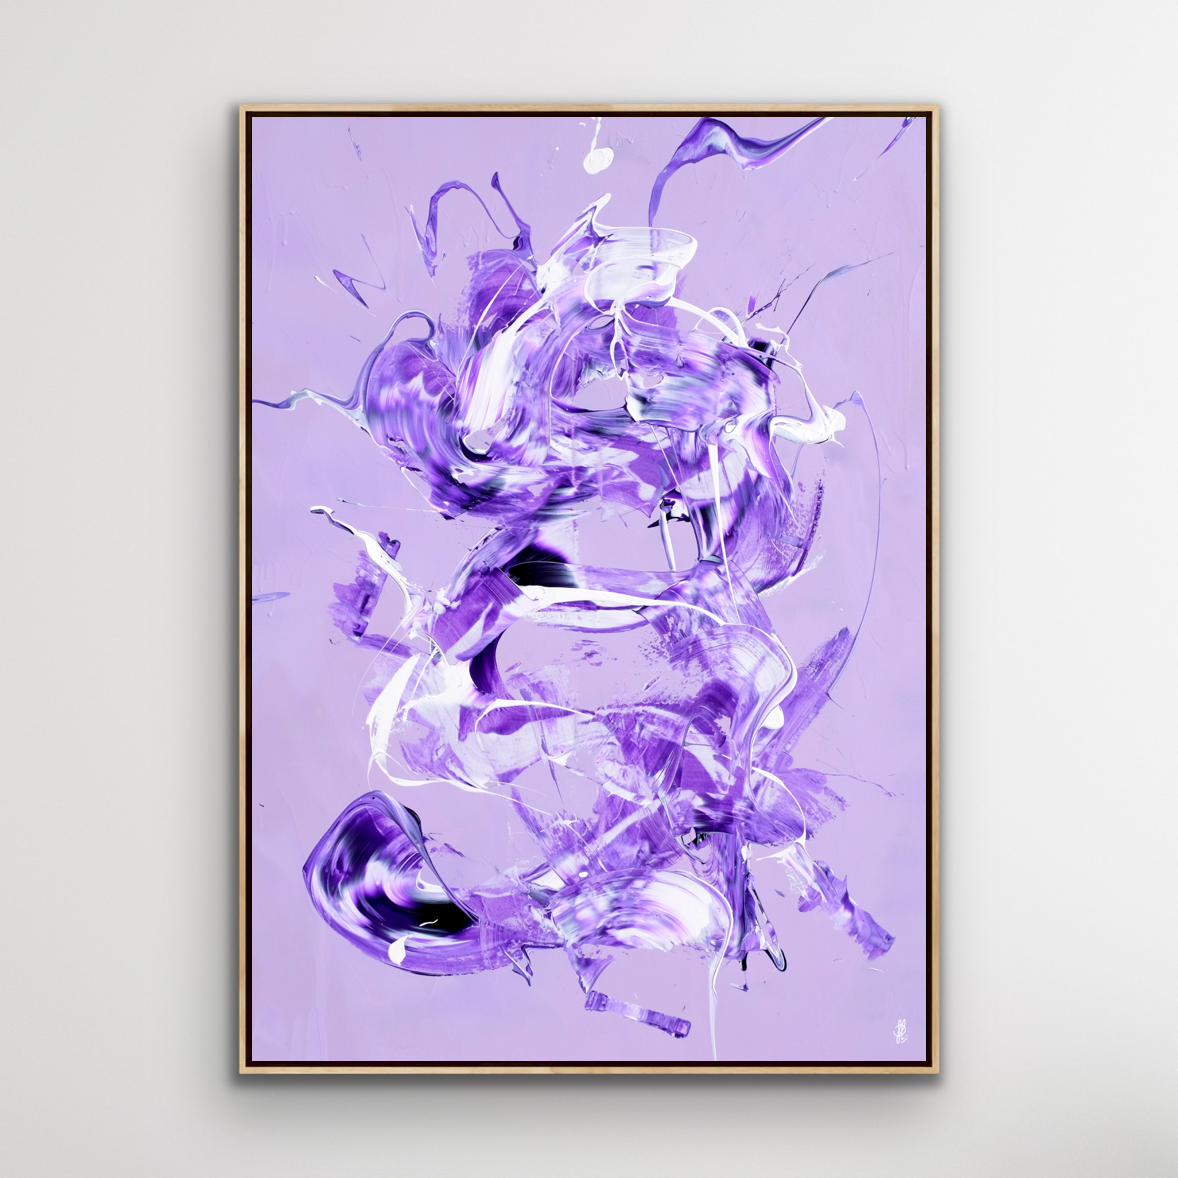 Canvas Print: "Less Is More #6"